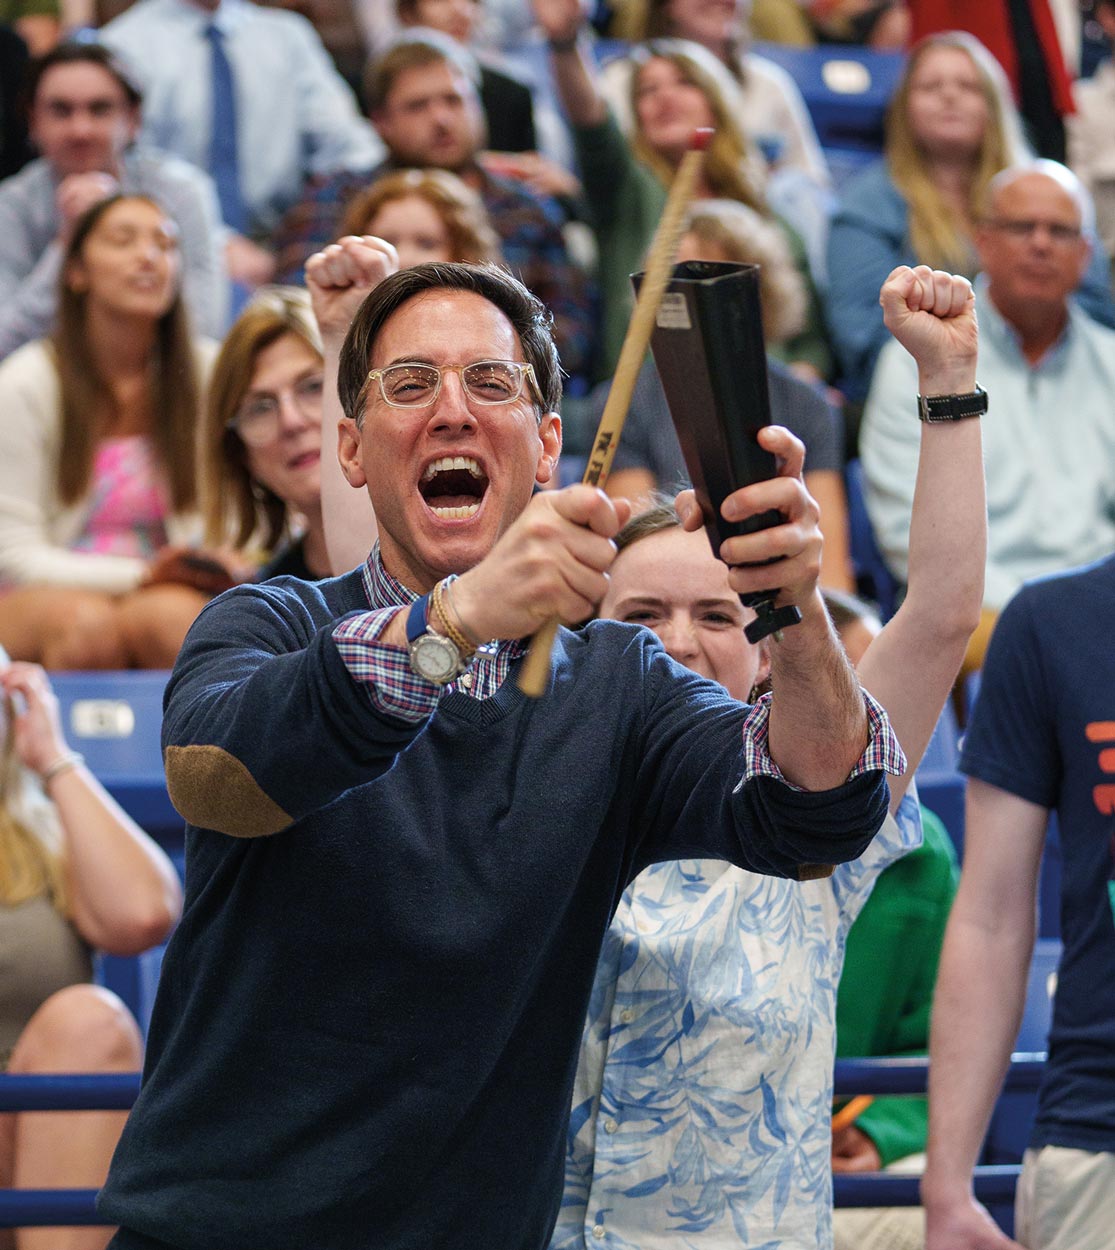 a man photographed in mid yell holds a large cowbell noise maker and a stick among a cheering audience